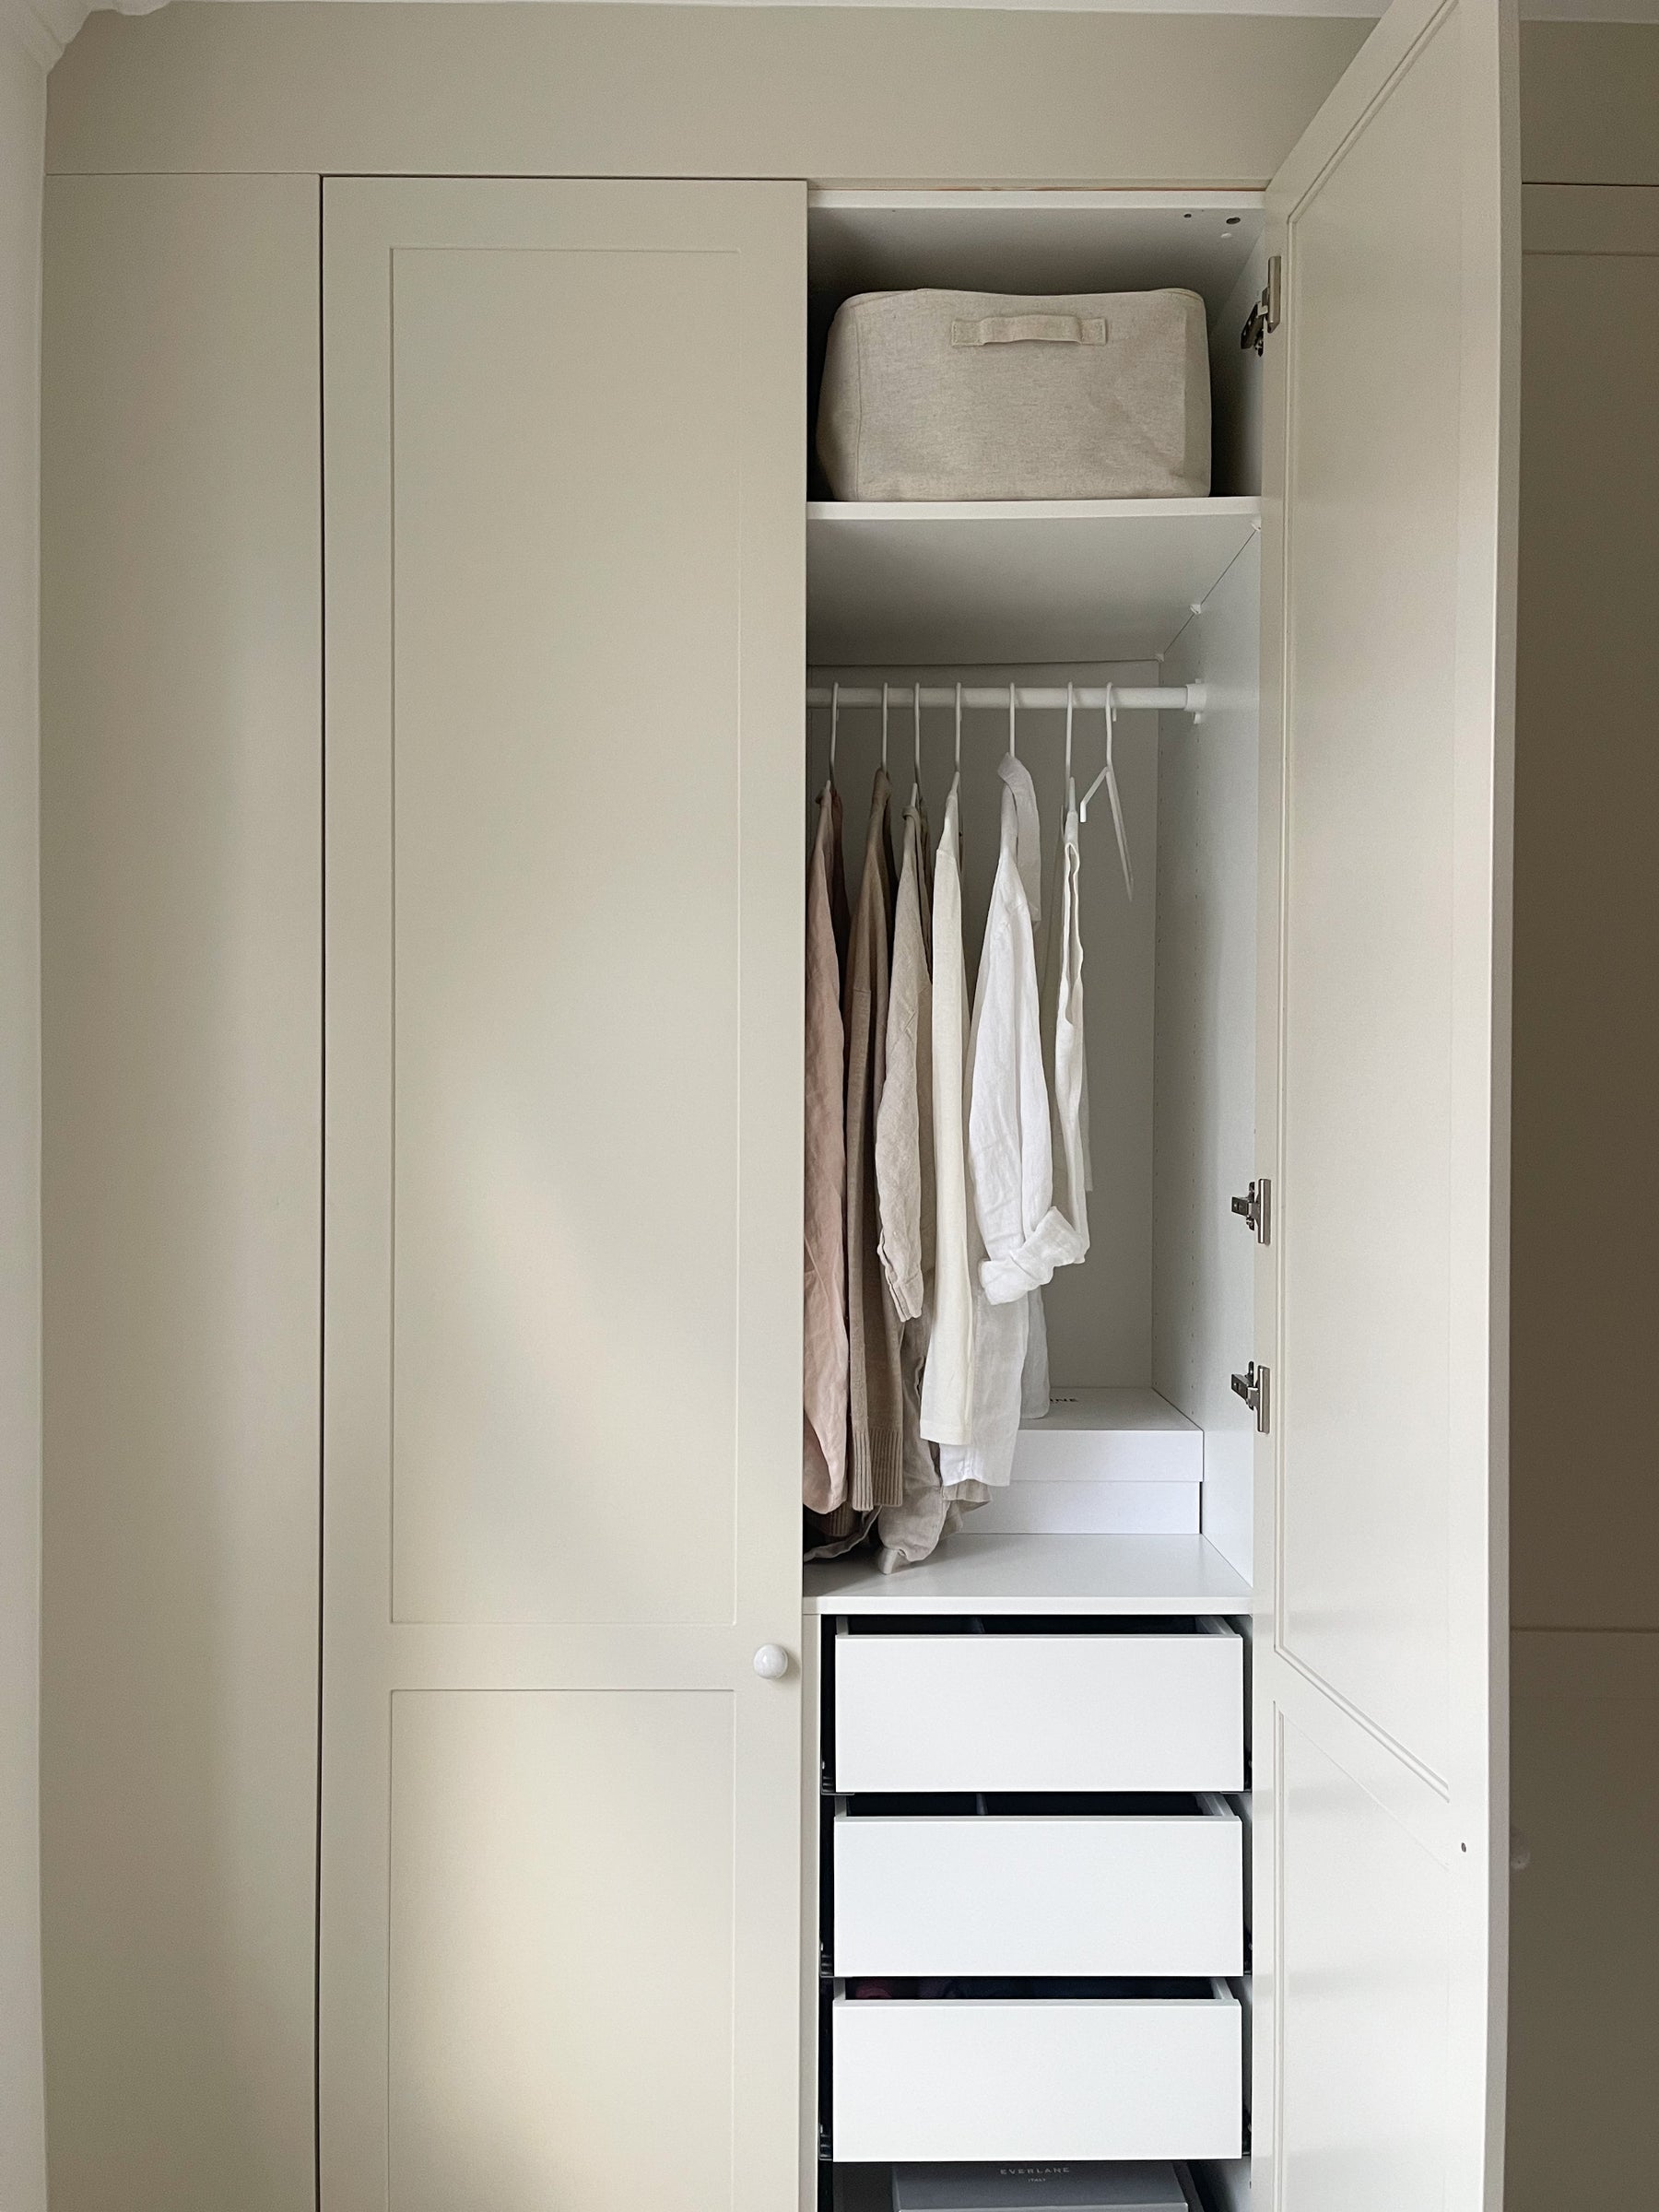 A.S.Helsingö Ensiö wardrobe in ivory beige color with ceramic candy handles